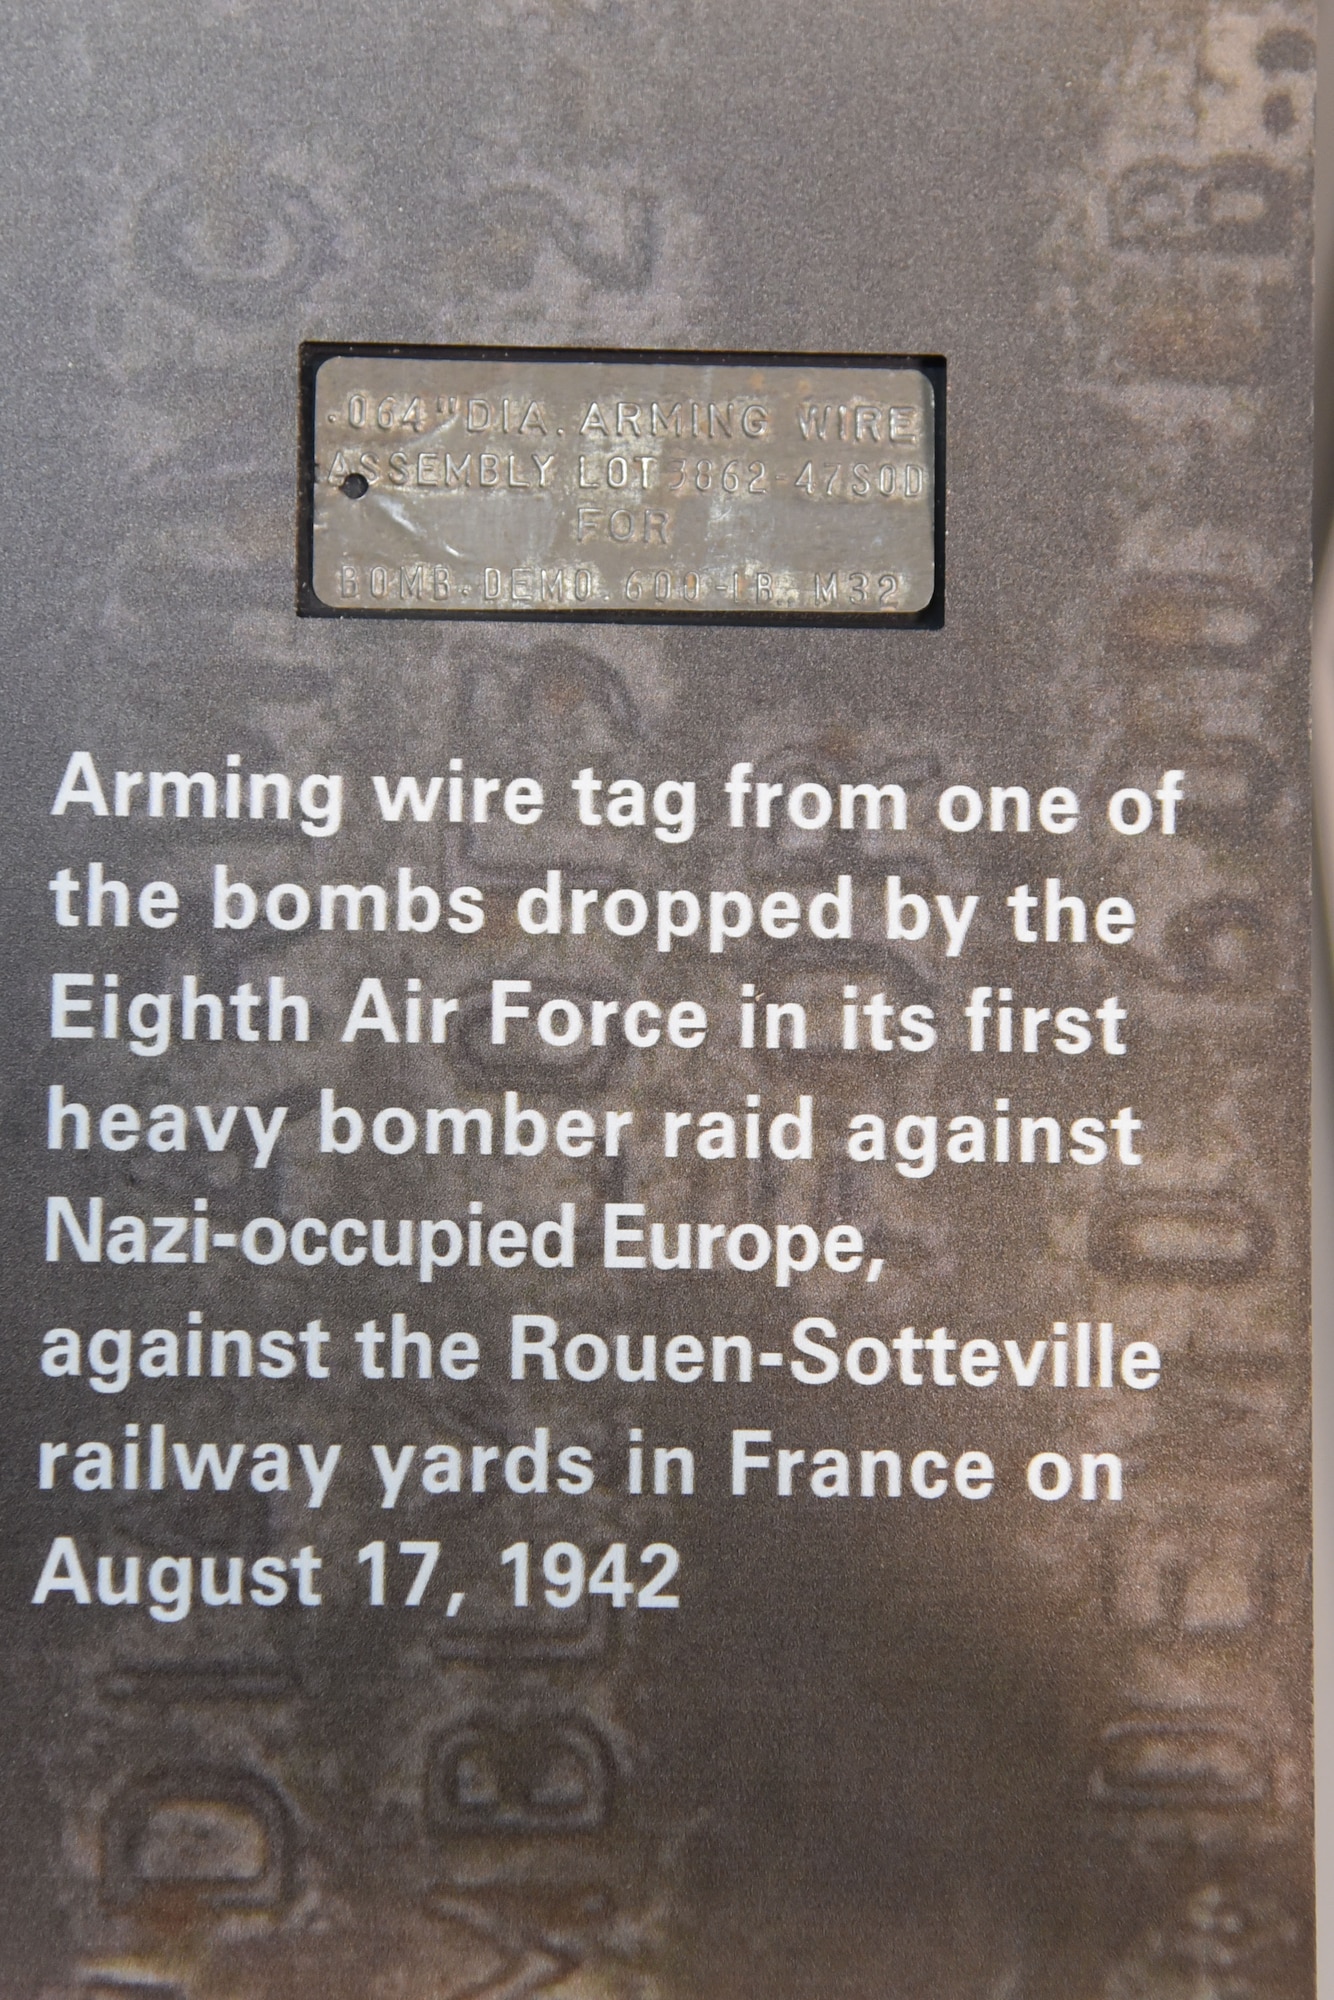 WWII arming wire tag from one of the bombs dropped by the Eighth Air Force in its first heavy bomber raid against Nazi-occupied Europe, against the Rouen-Sotteville railway yards in France on August 17, 1942.